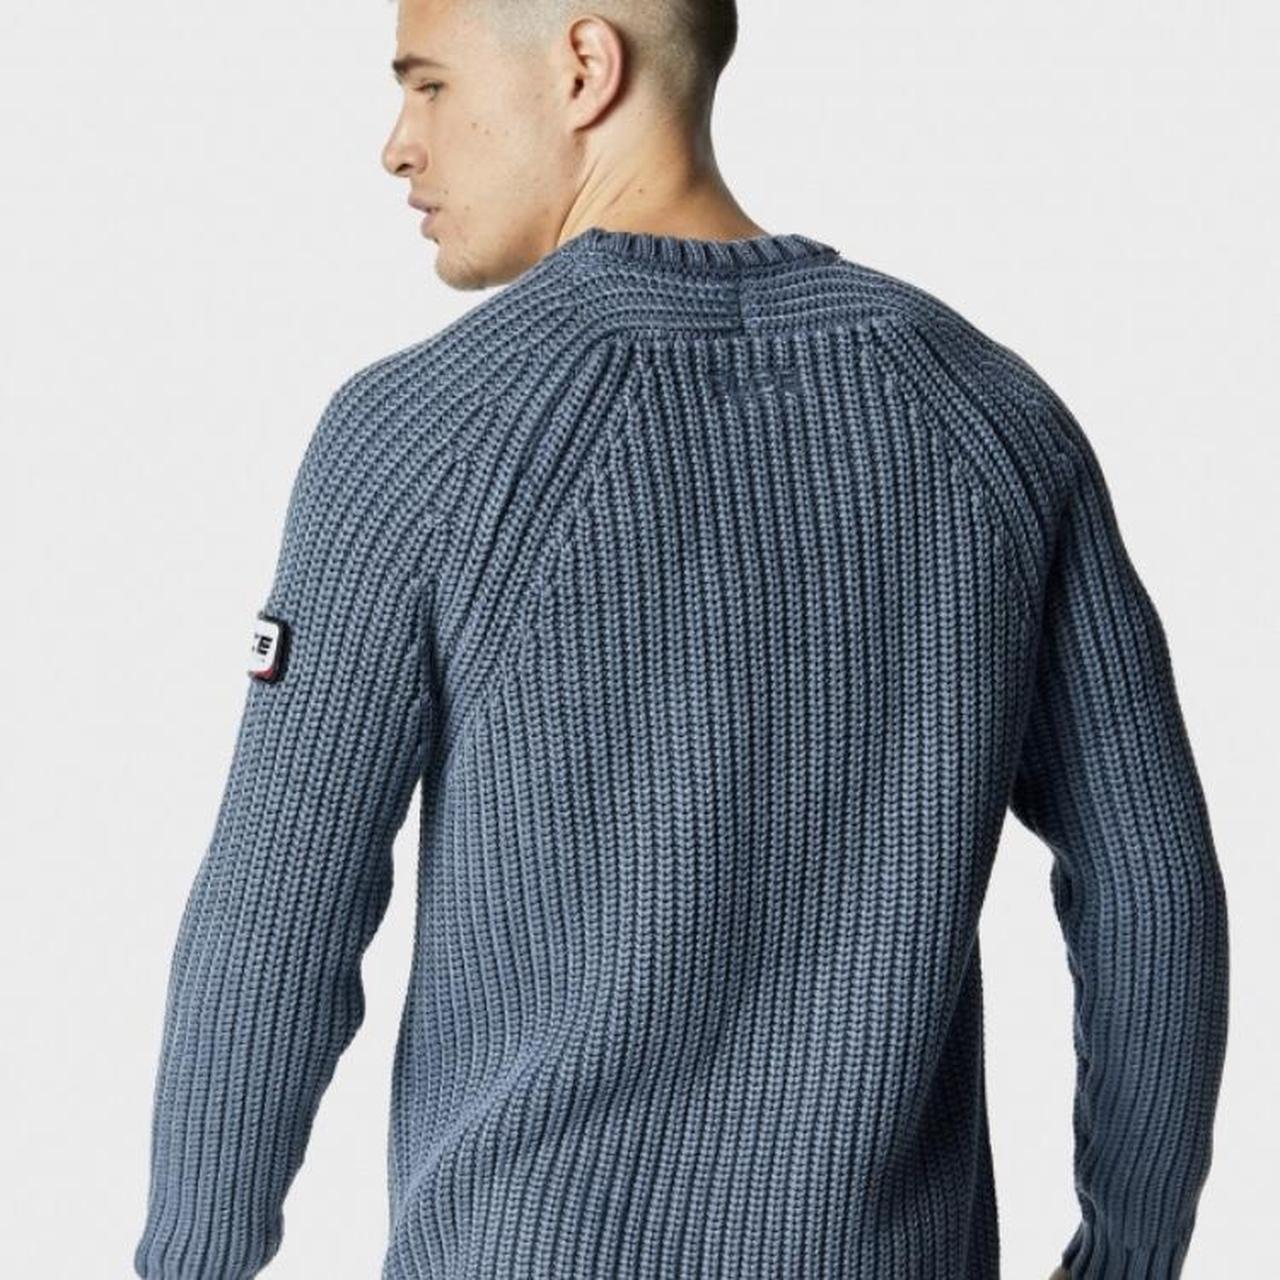 Product Image 3 - 883 POLICE

Winford Blue Knitwear

PLCE Winfold